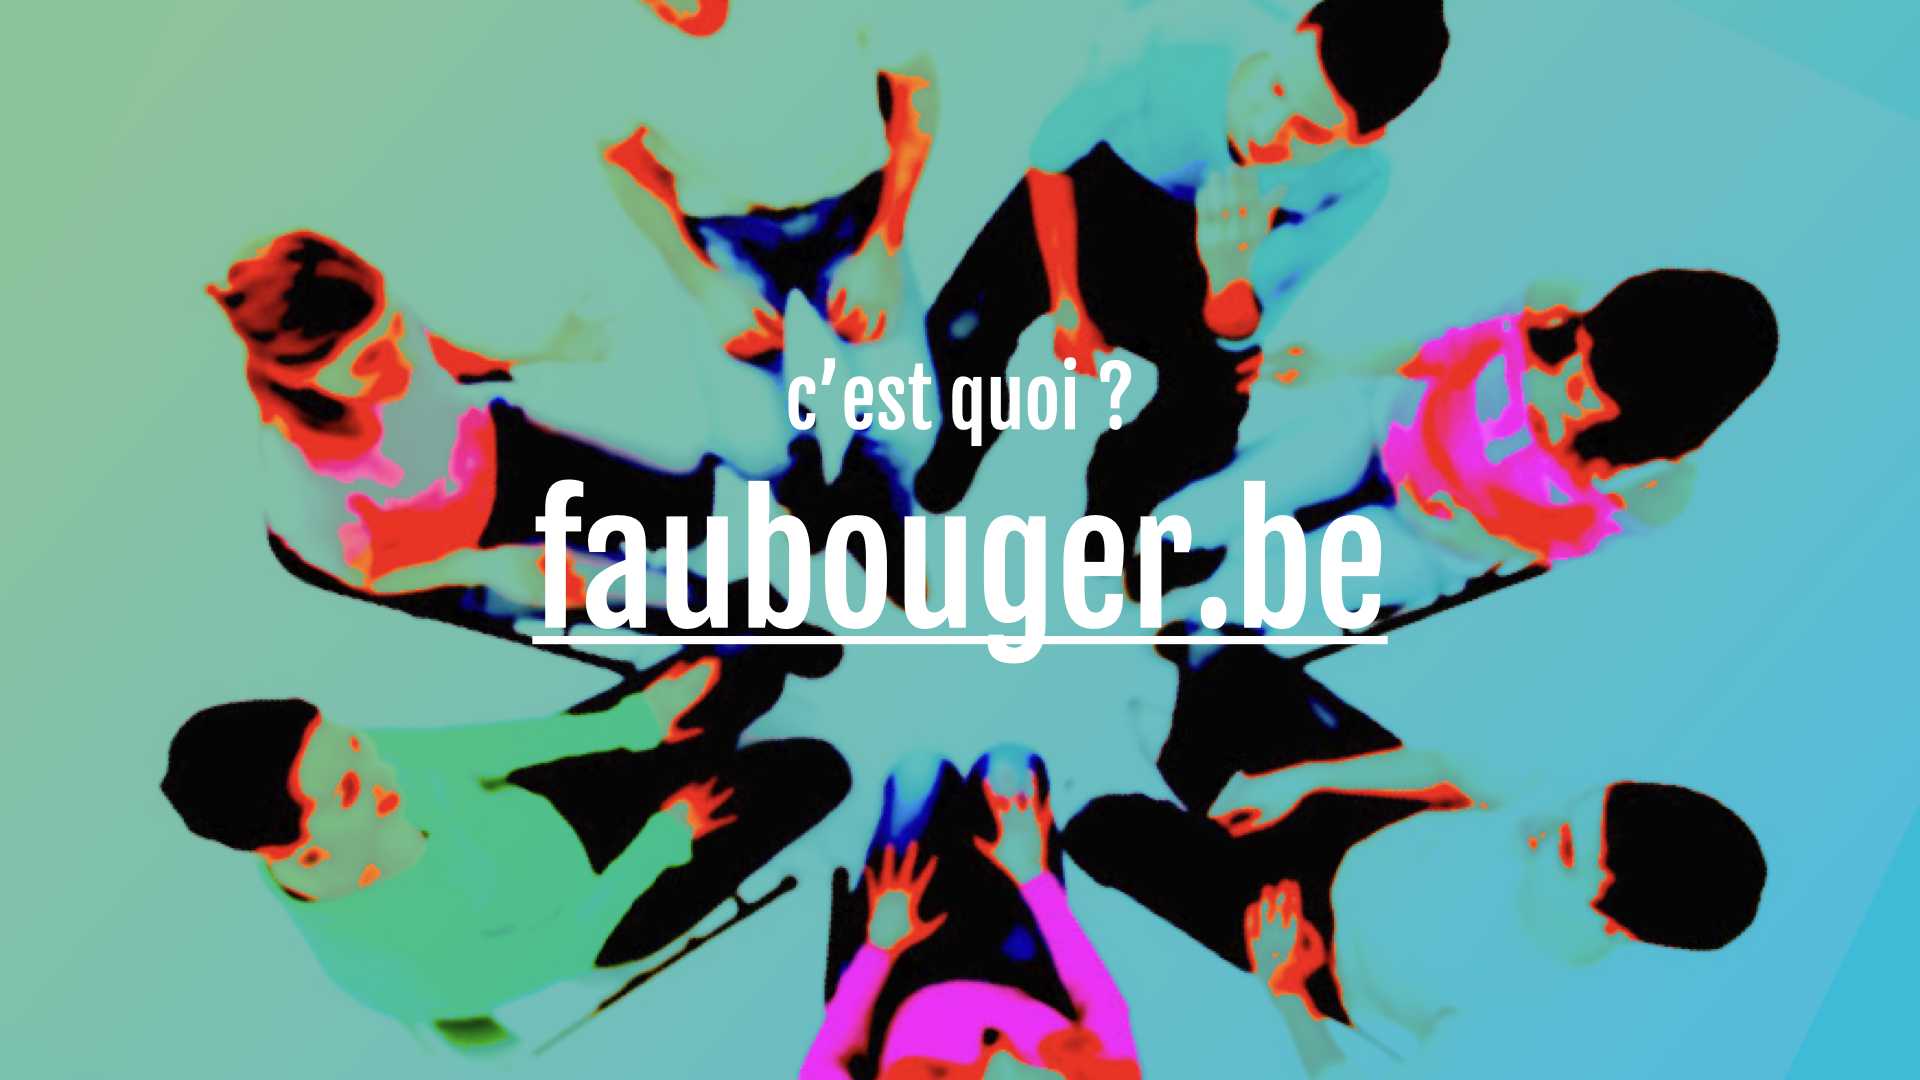 faubouger c quoi.001.jpeg